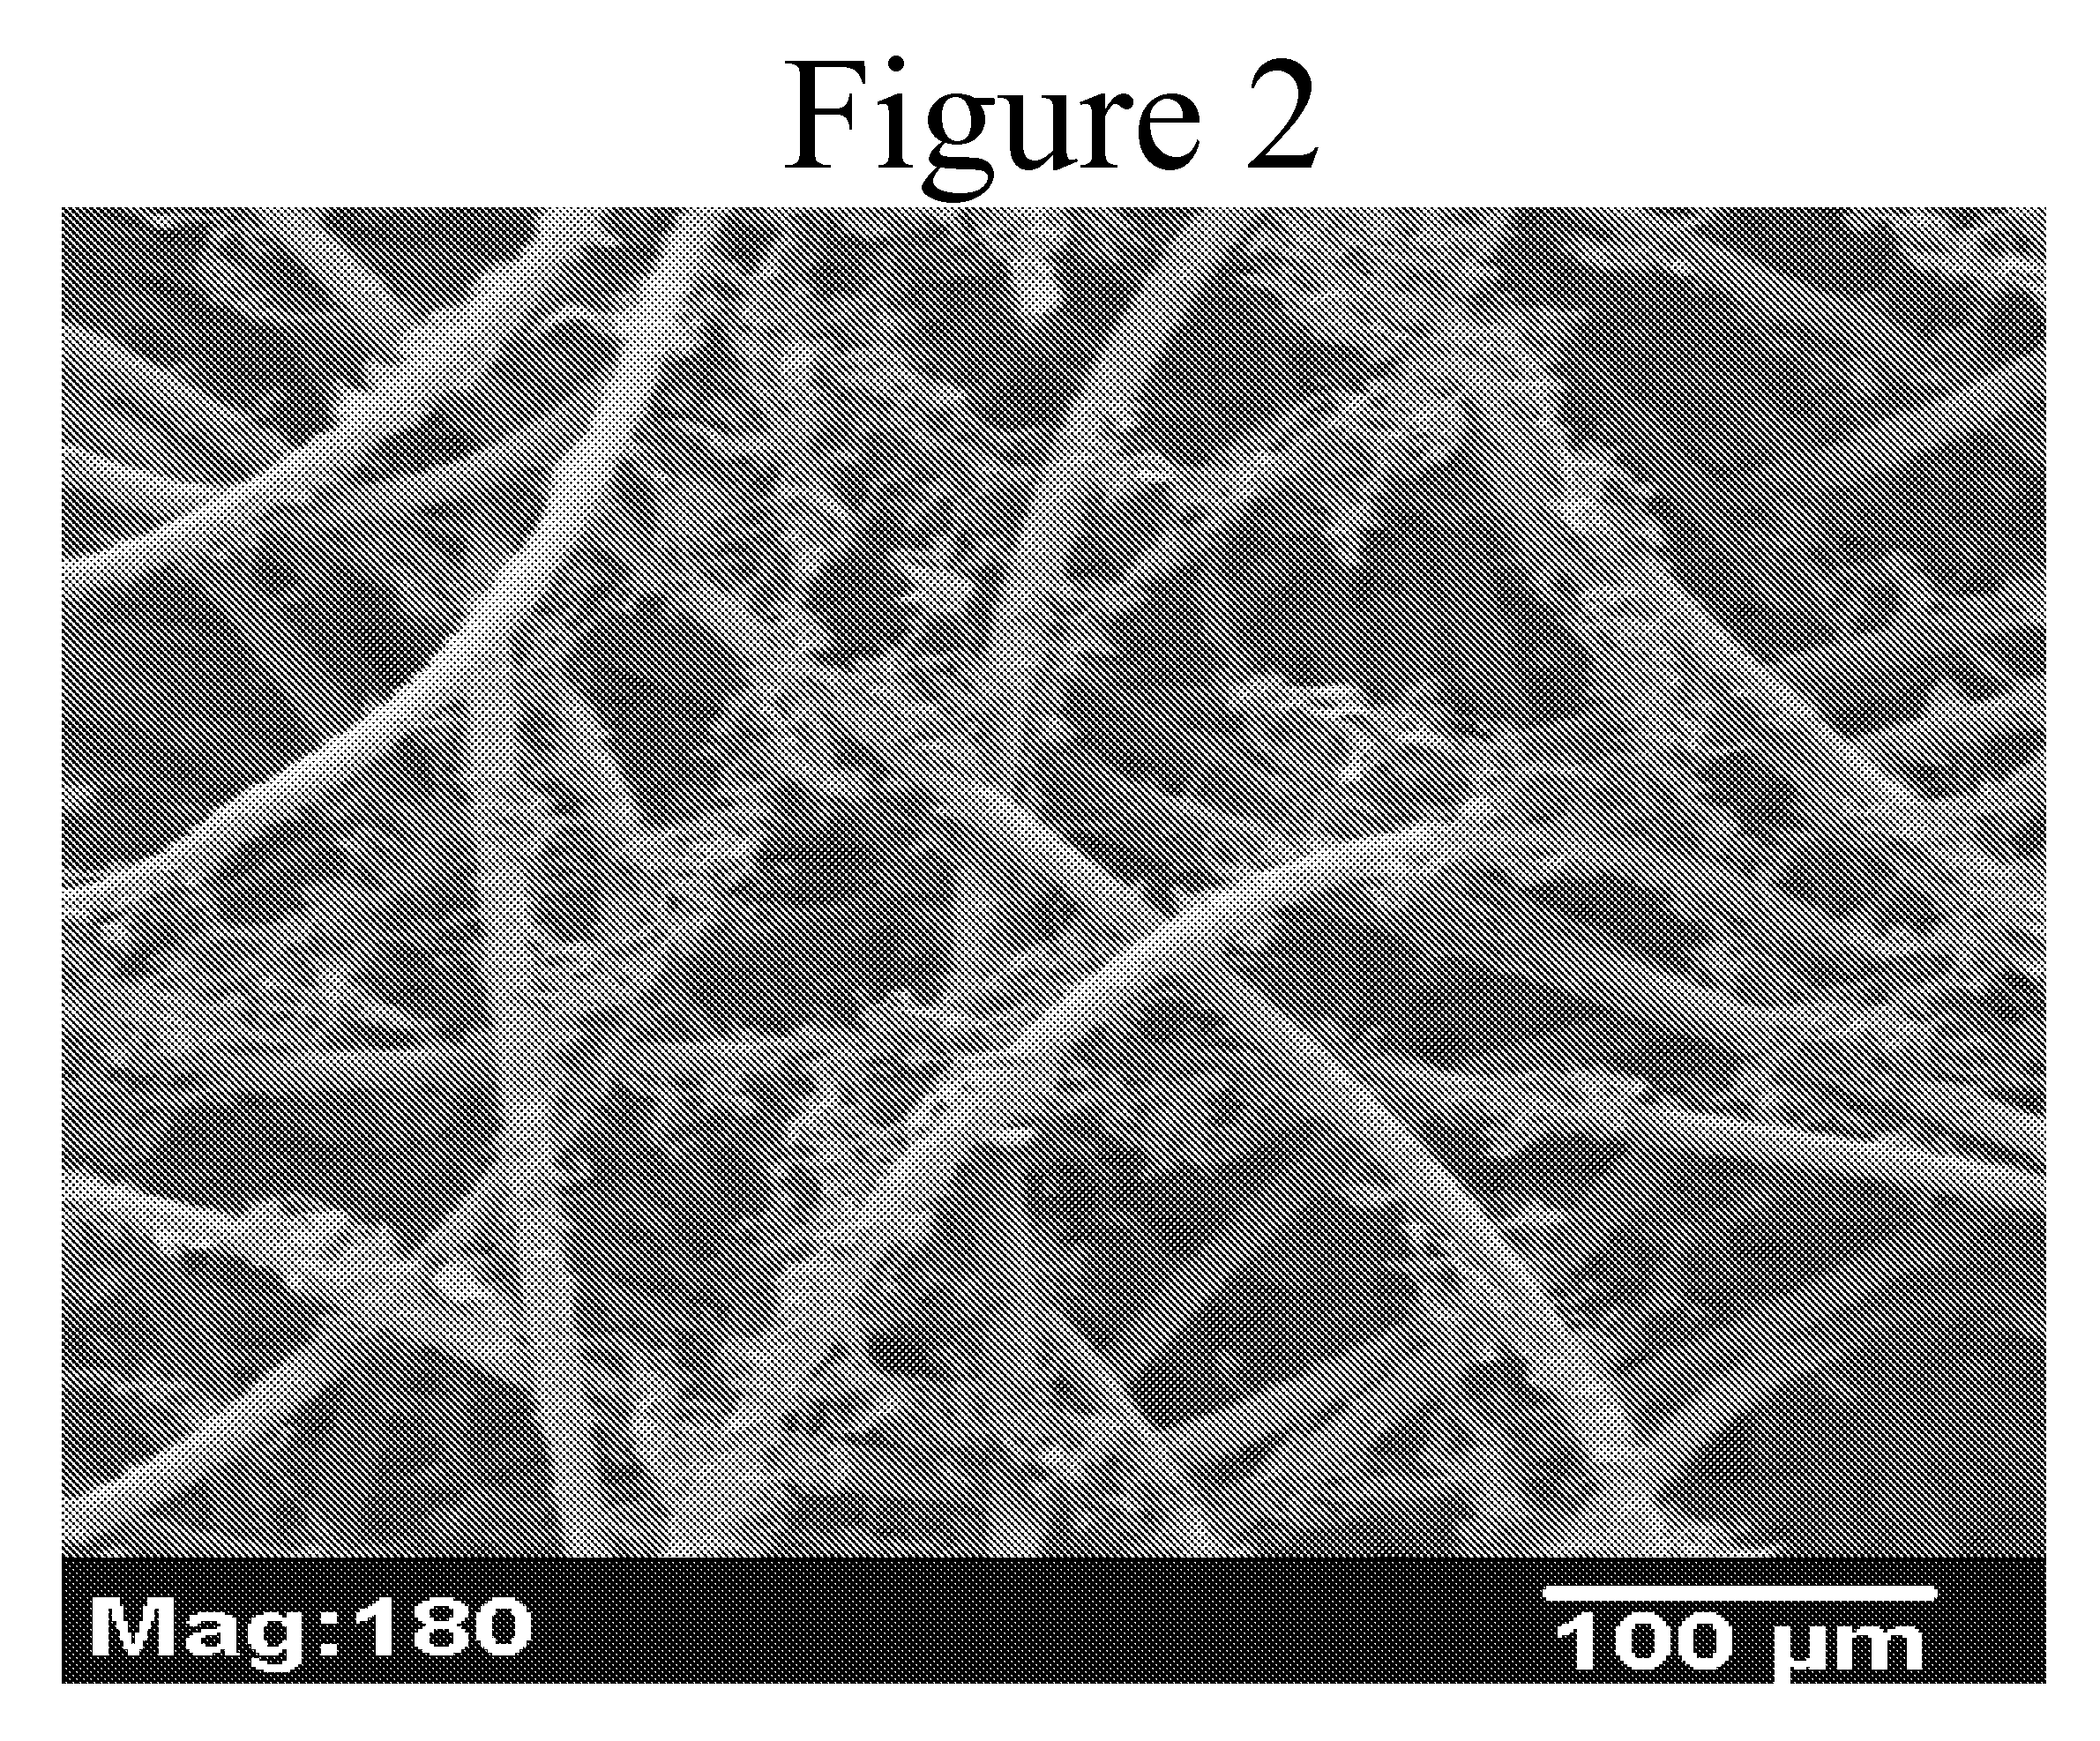 Composite Scaffolds Seeded with Mammalian Cells